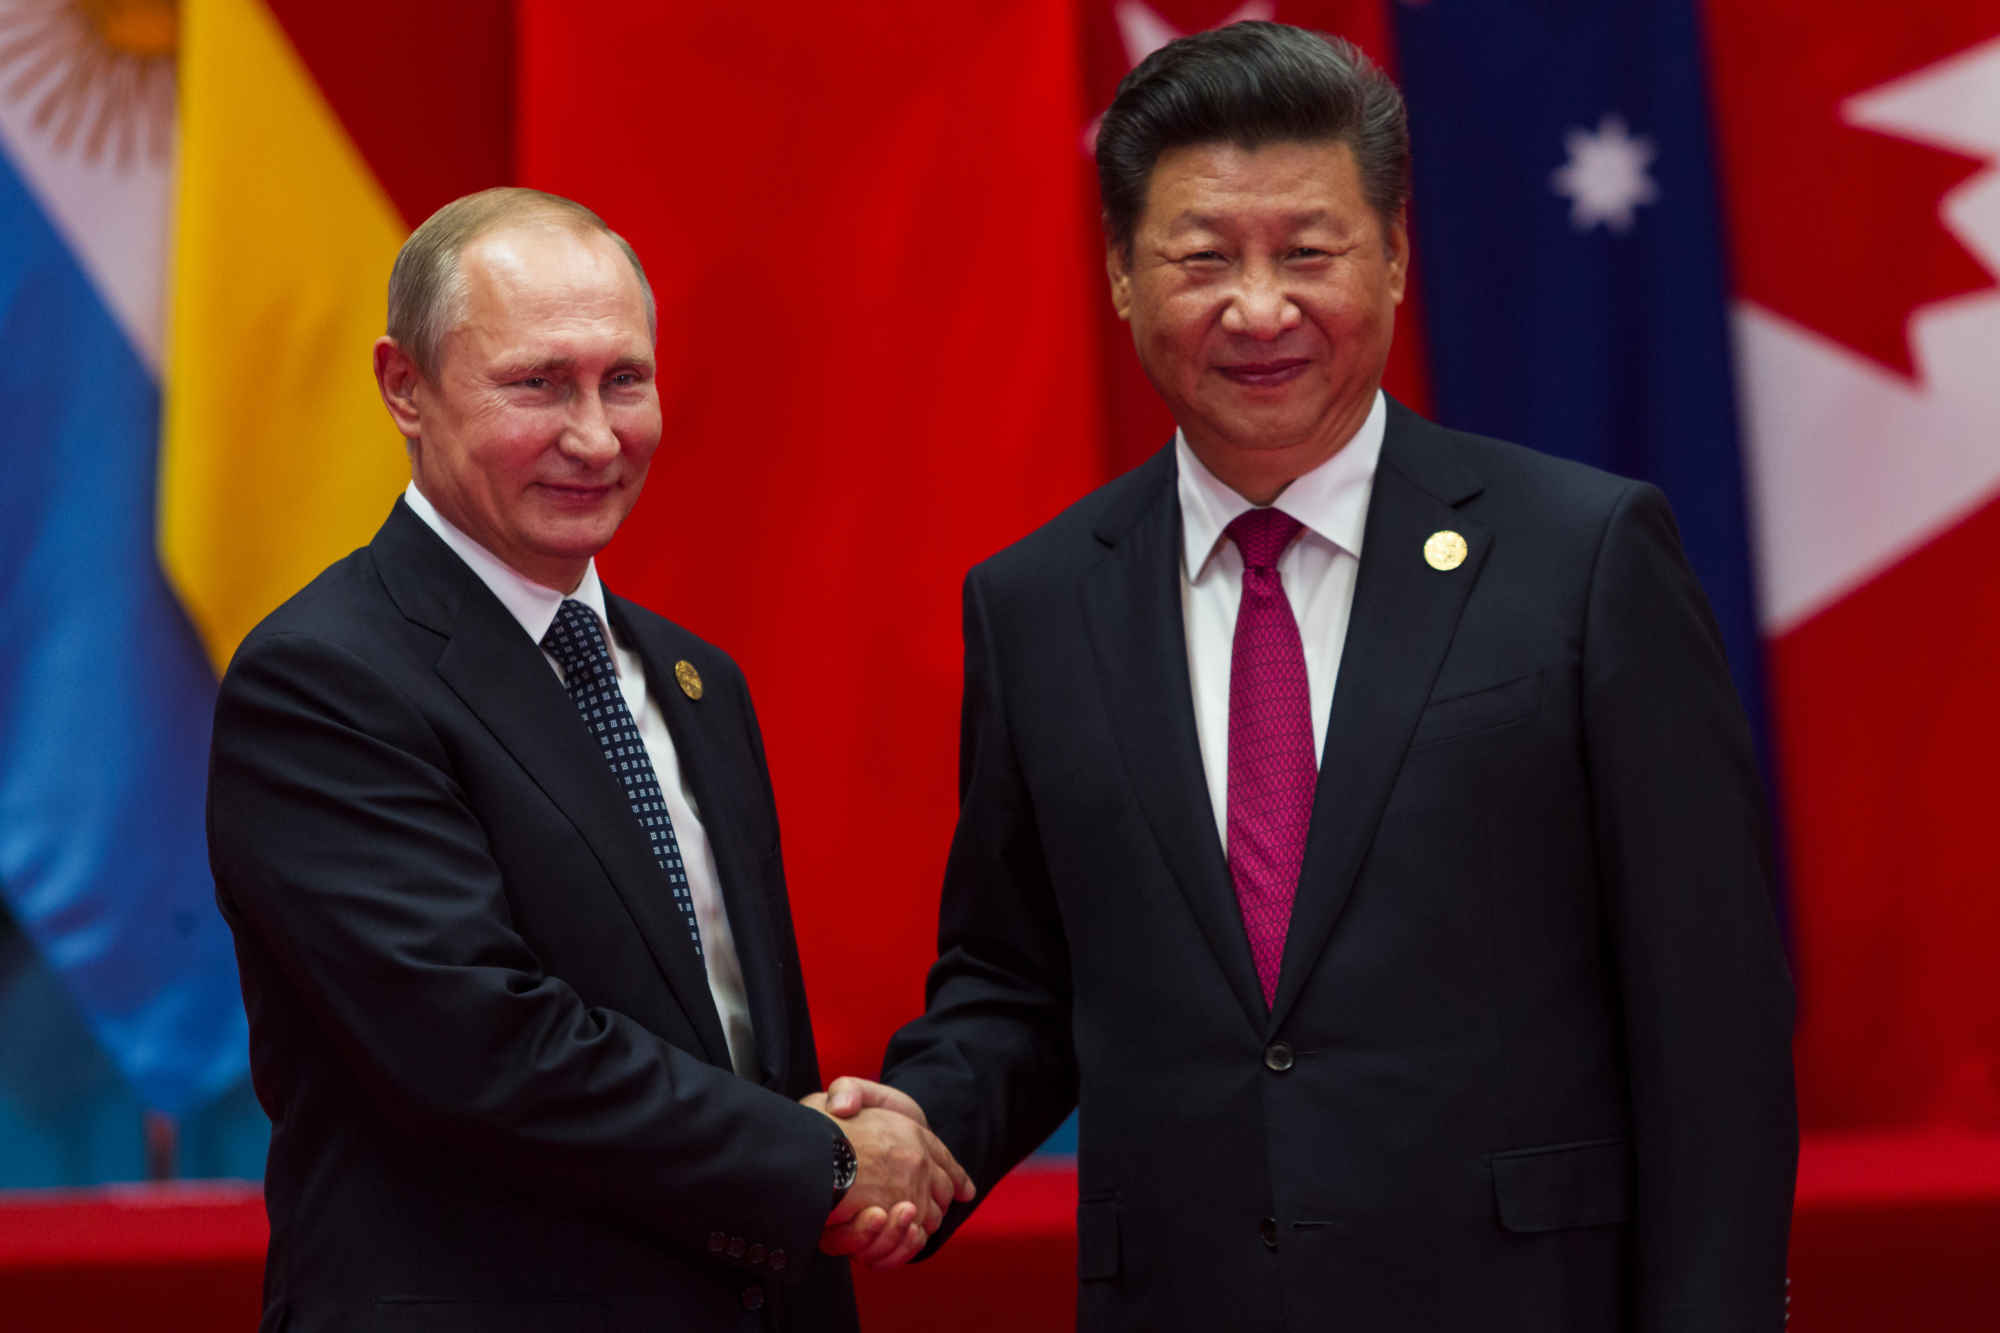 Top Division: China and Russia lead